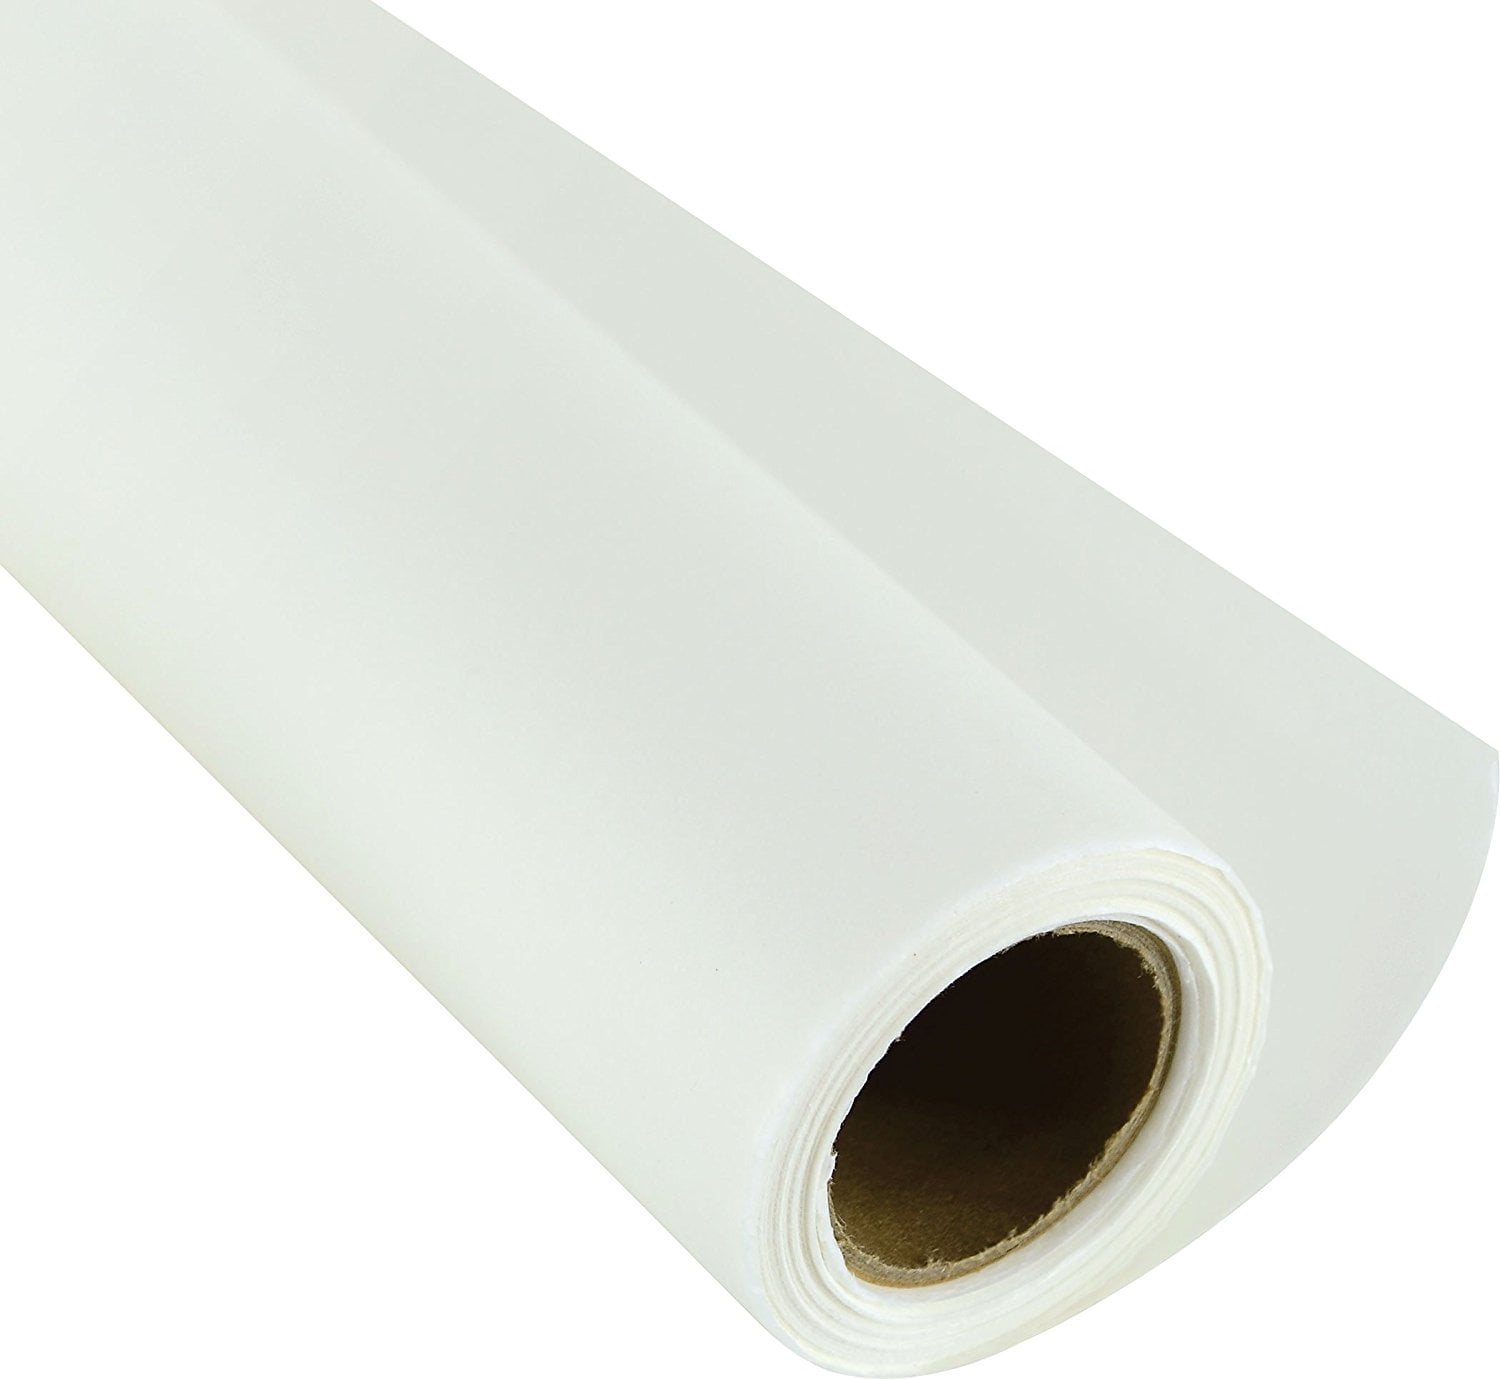 24-Inch by 50-Yards Bee Paper White Sketch and Trace Roll 